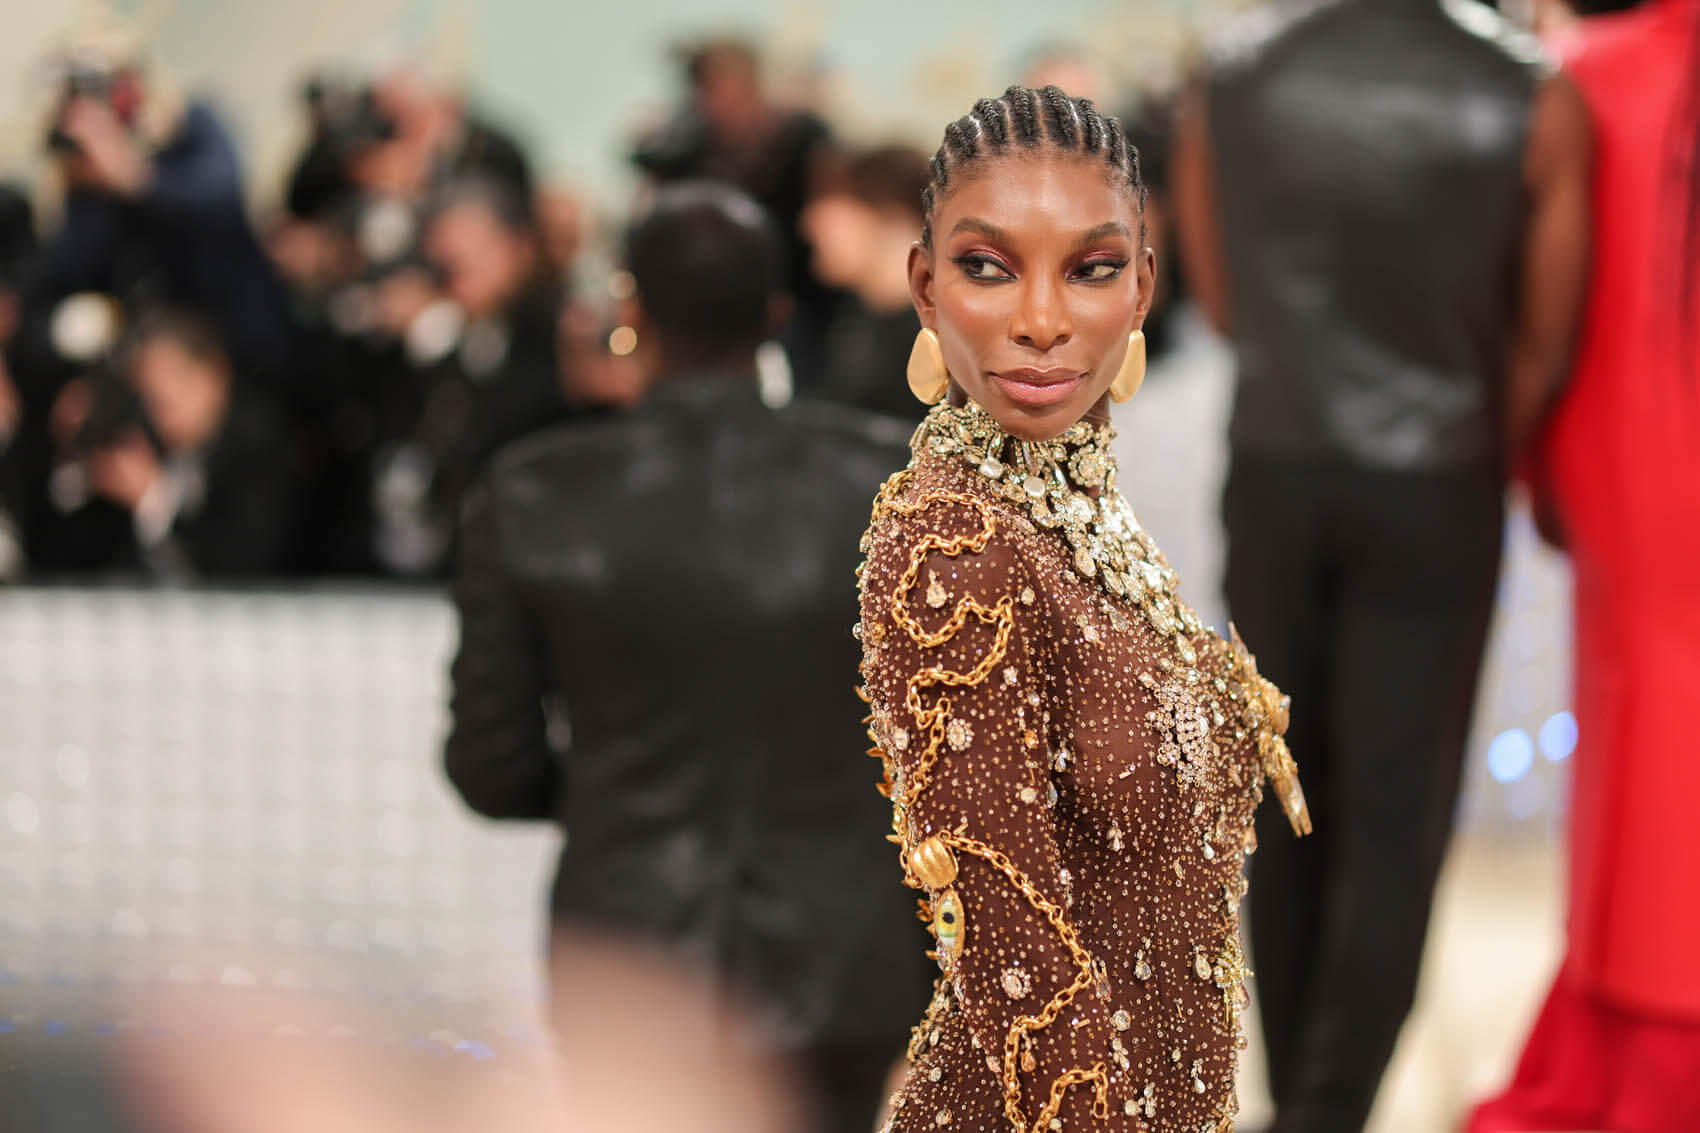 Michaela Coel was among few who tried something edgy on a 'safe' Met